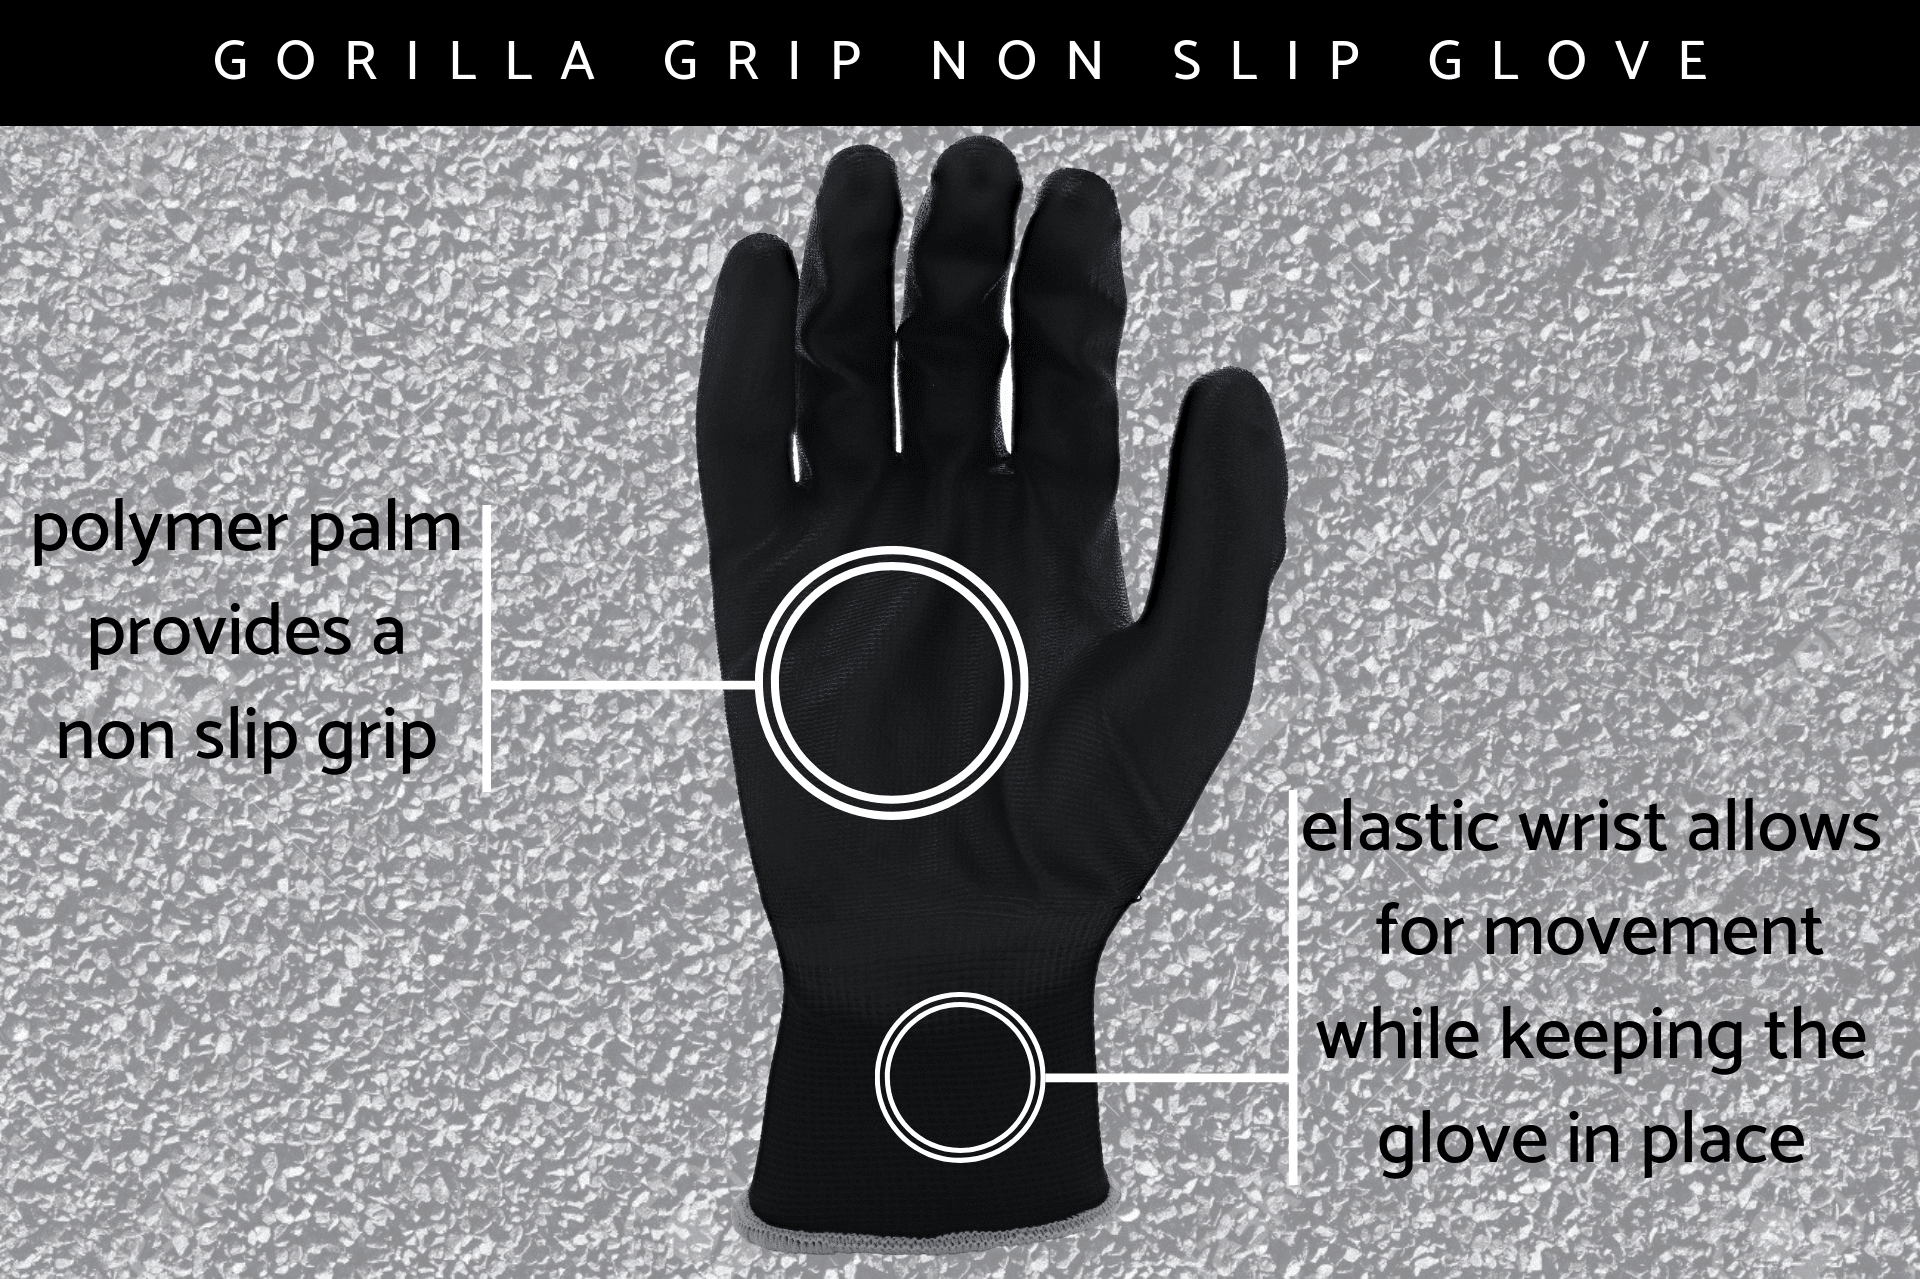 Gorilla Grip All-Purpose Work Gloves plunge to $3.50 Prime shipped (Save  25%)